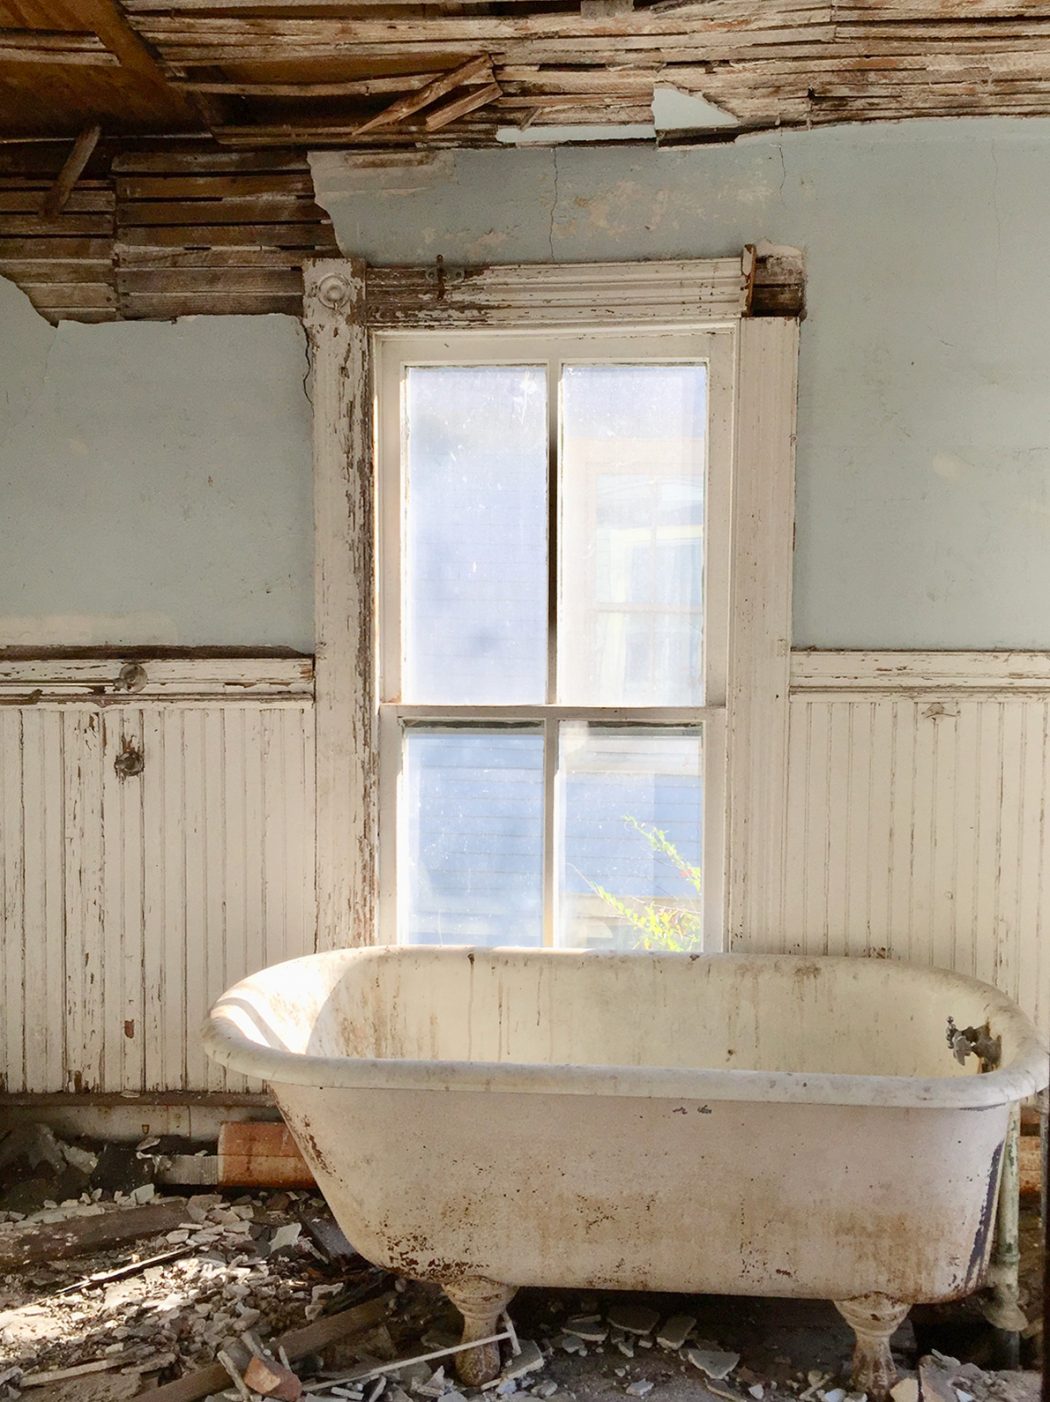 Before photo of beach house bathroom with crumbling walls and dirty tub